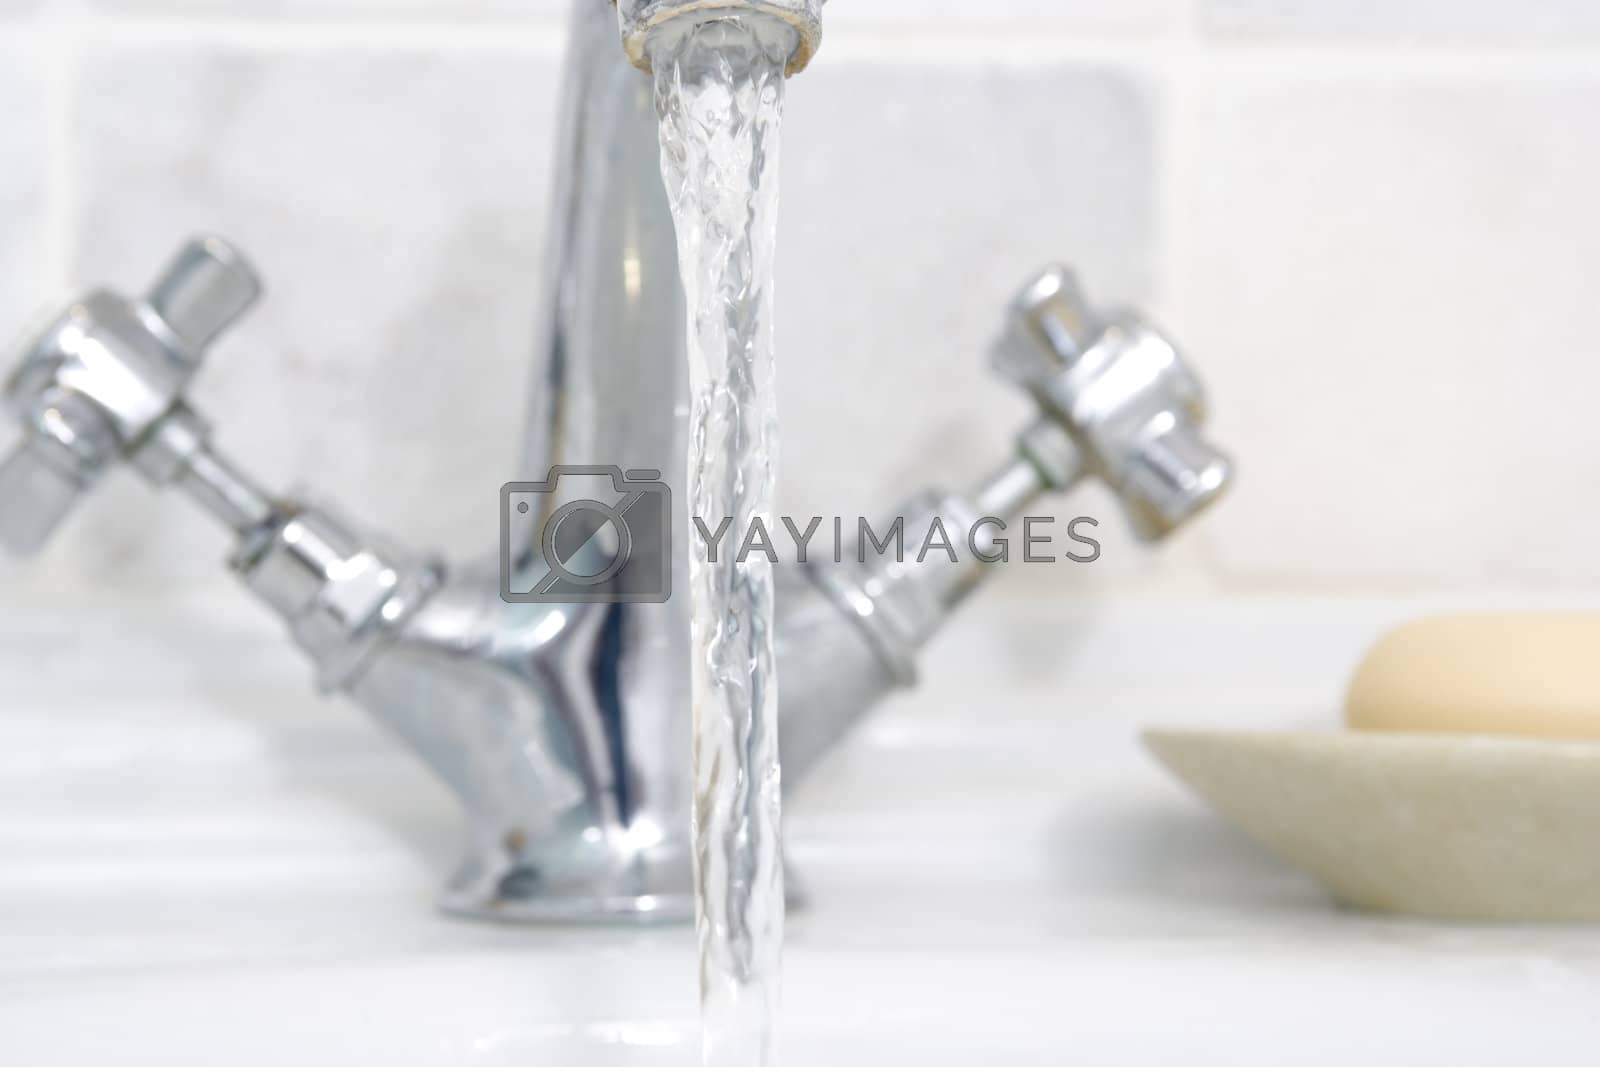 Royalty free image of Running bathroom sink by MonkeyBusiness